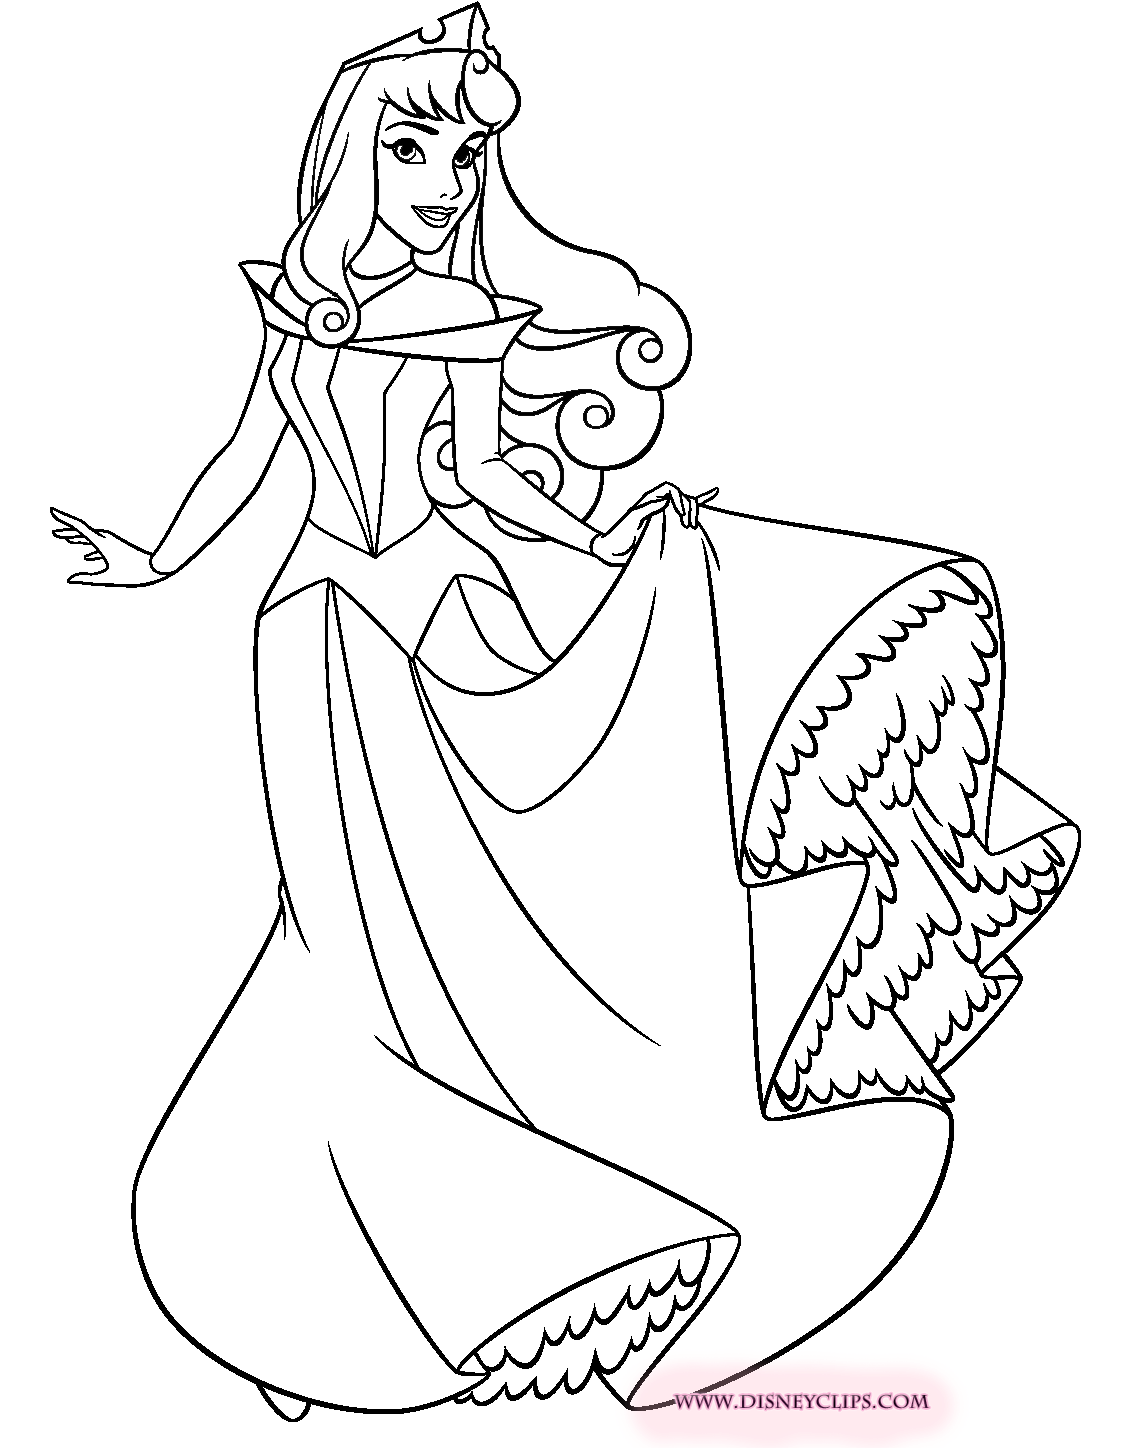 Sleeping Beauty Coloring Pages 20   Disneyclips.com